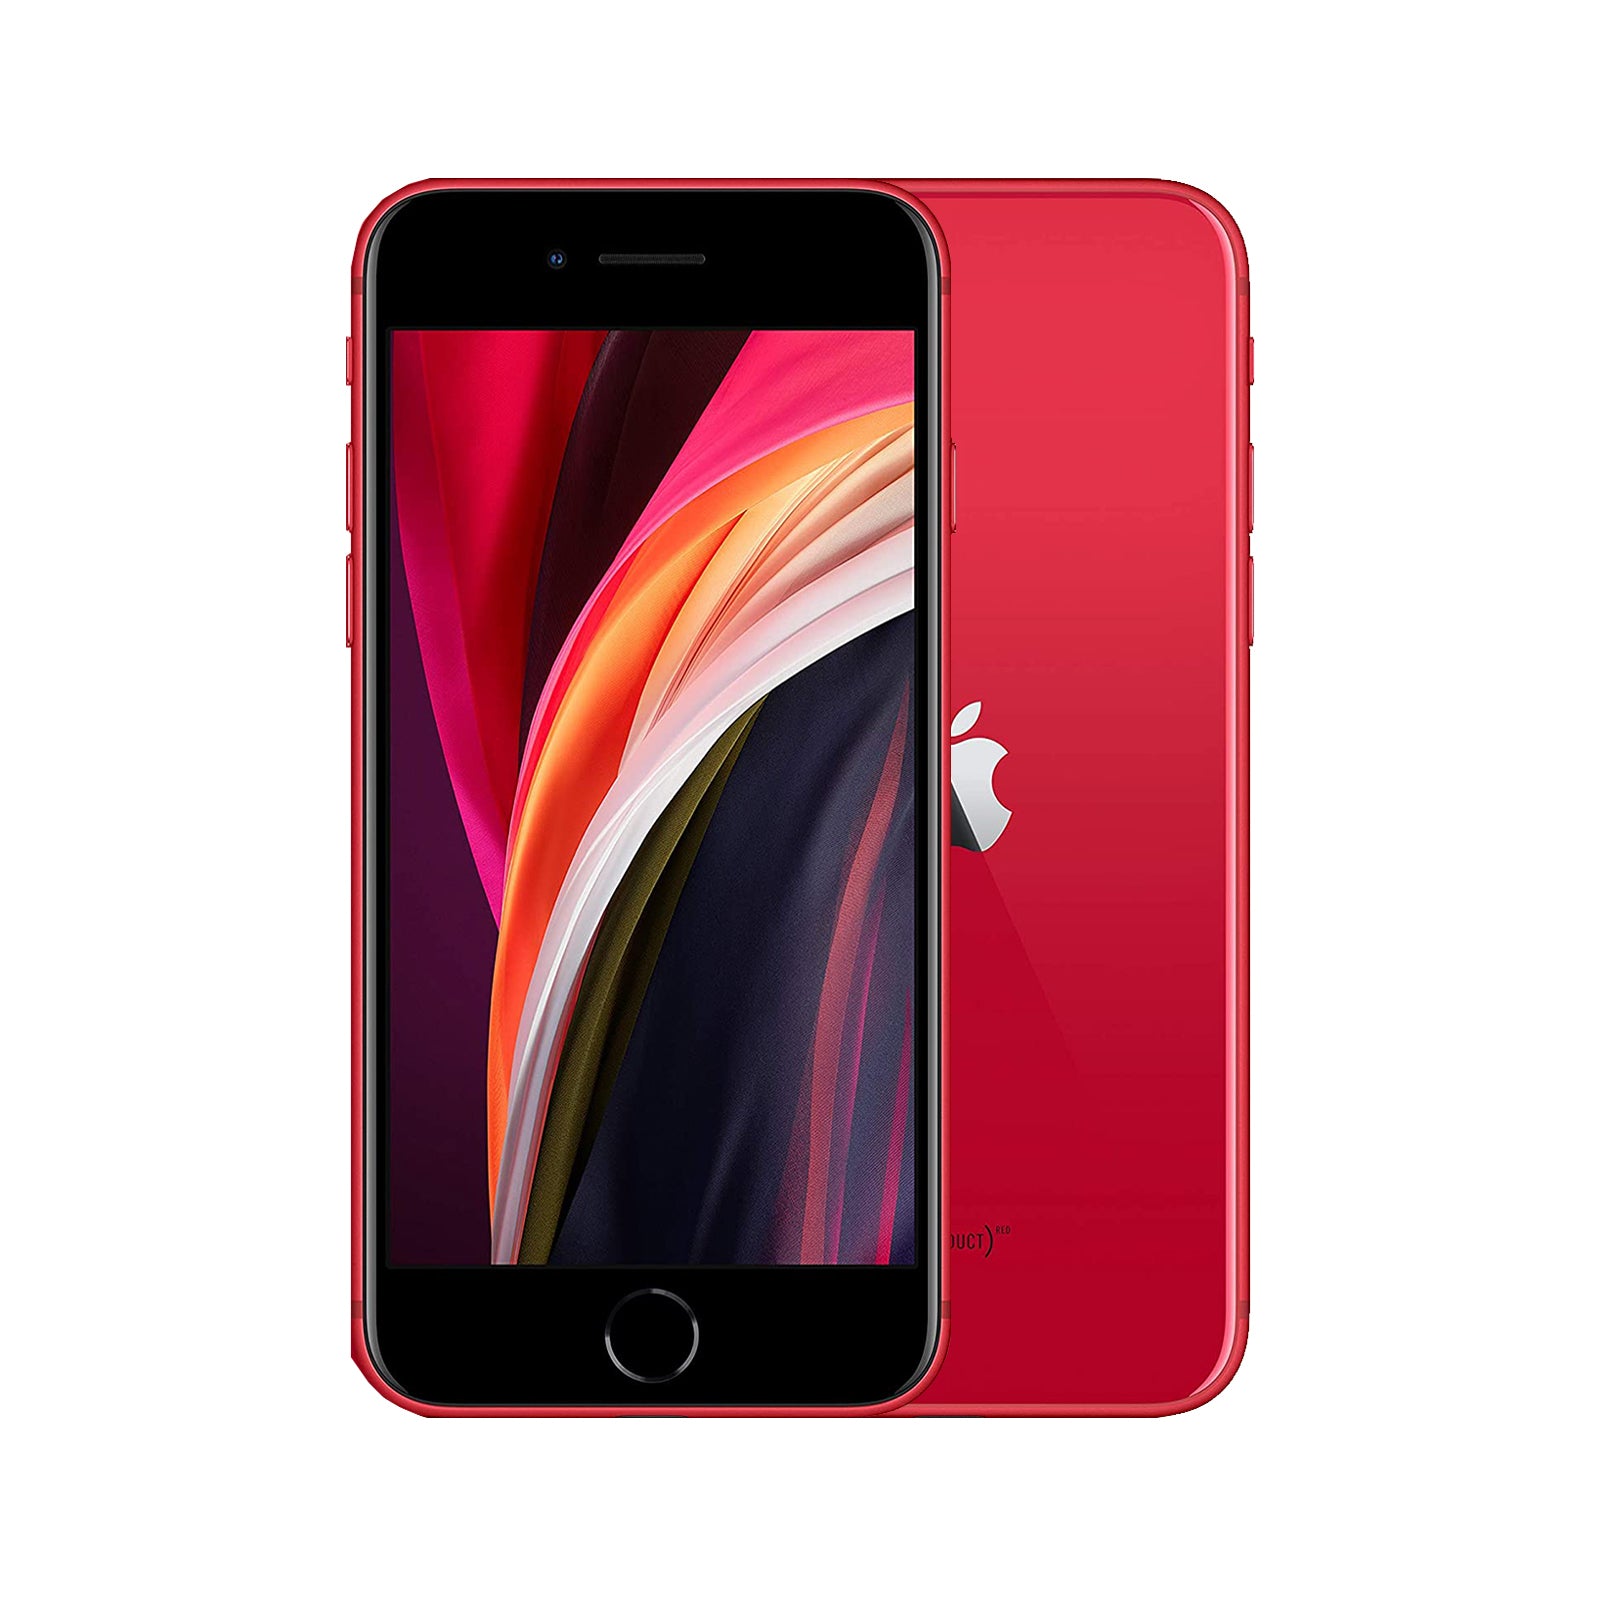 Apple iPhone SE (2020) 64GB Red - As New - Refurbished